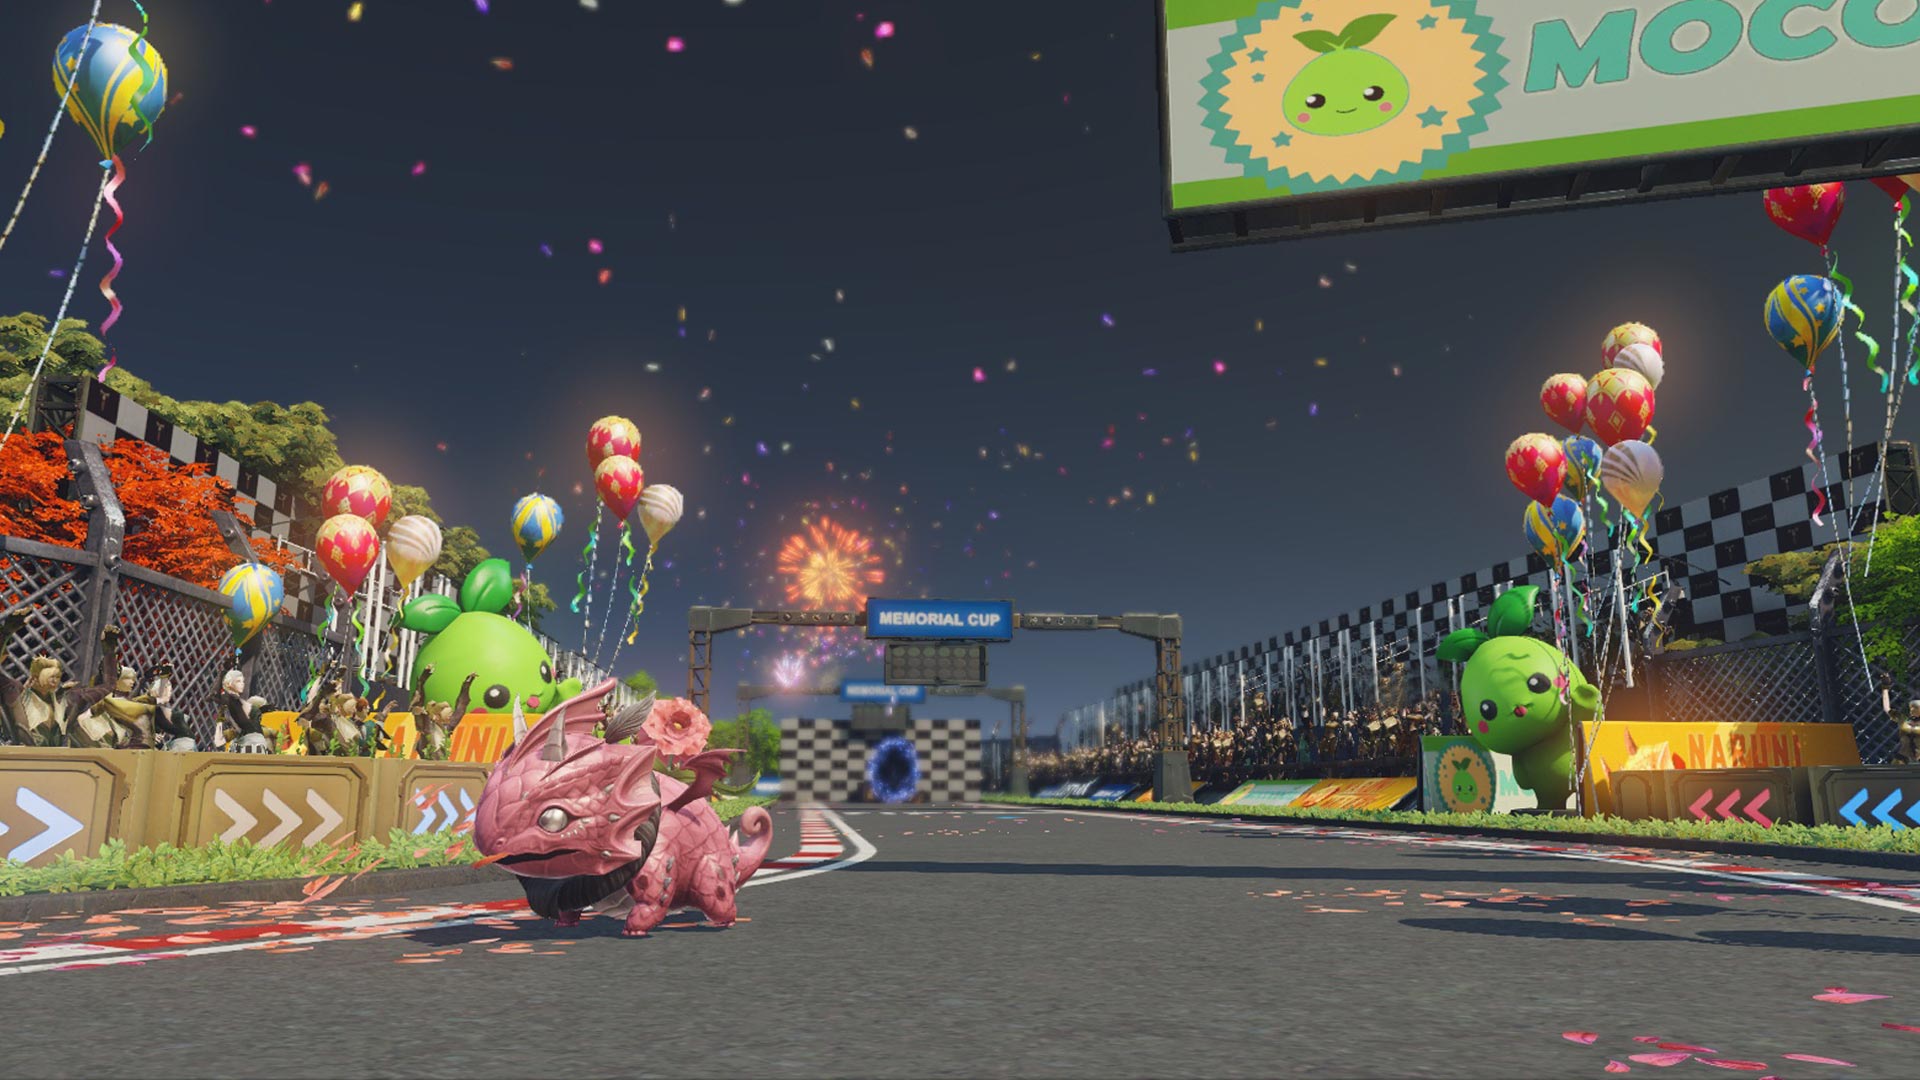 A snapshot of the Arkesia Grand Prix. Balloons, fireworks, and other celebrations are visible as a small pink lizard zooms around a racetrack.